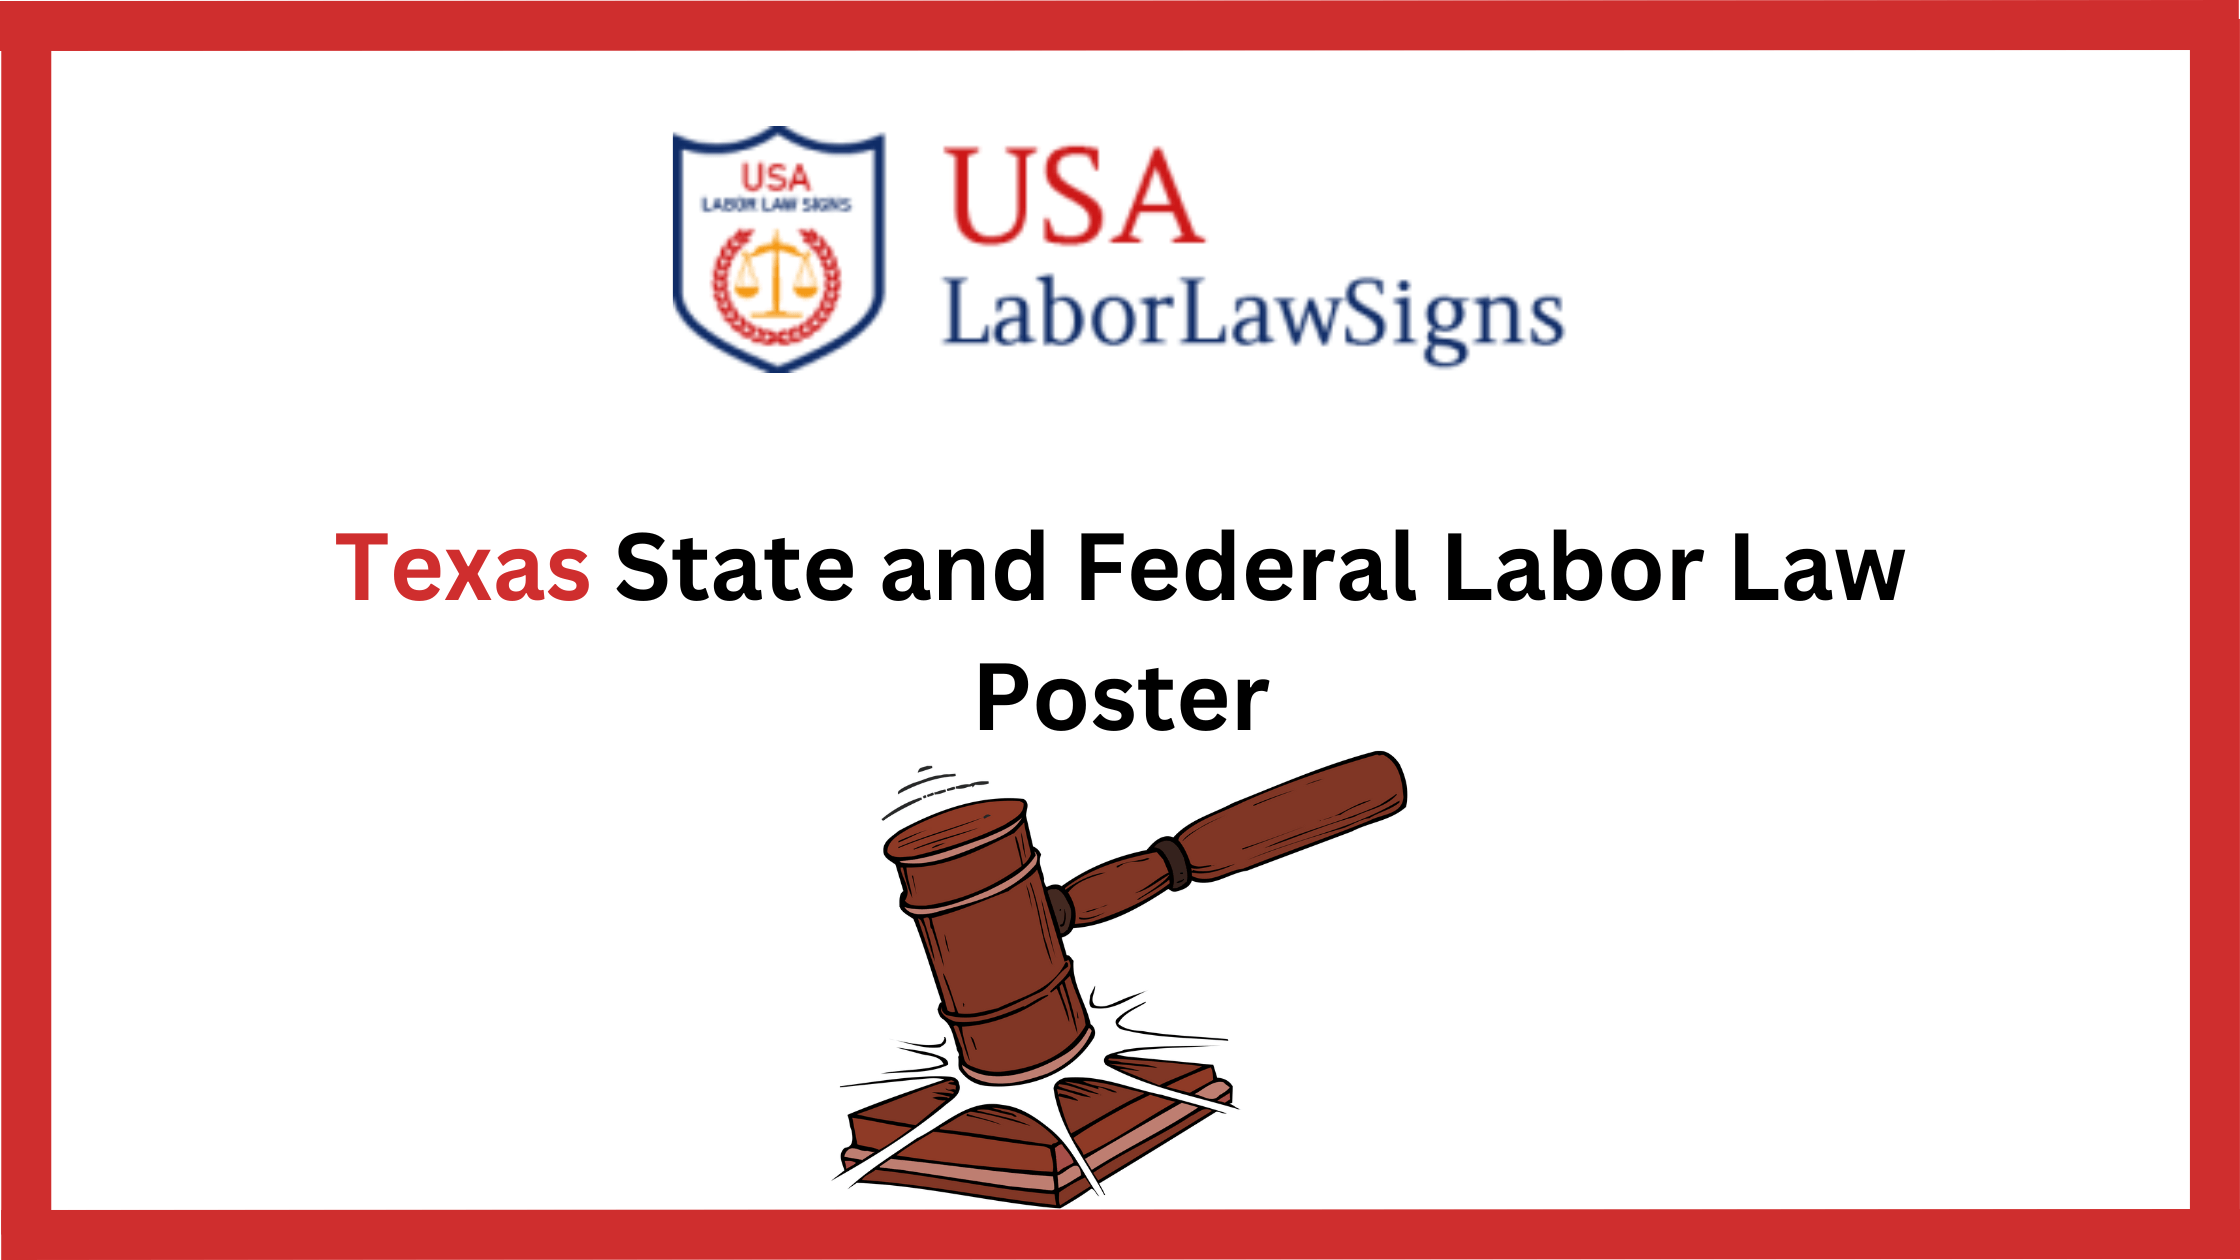 How to Stay Compliant with Texas Labor Law Poster Requirements?